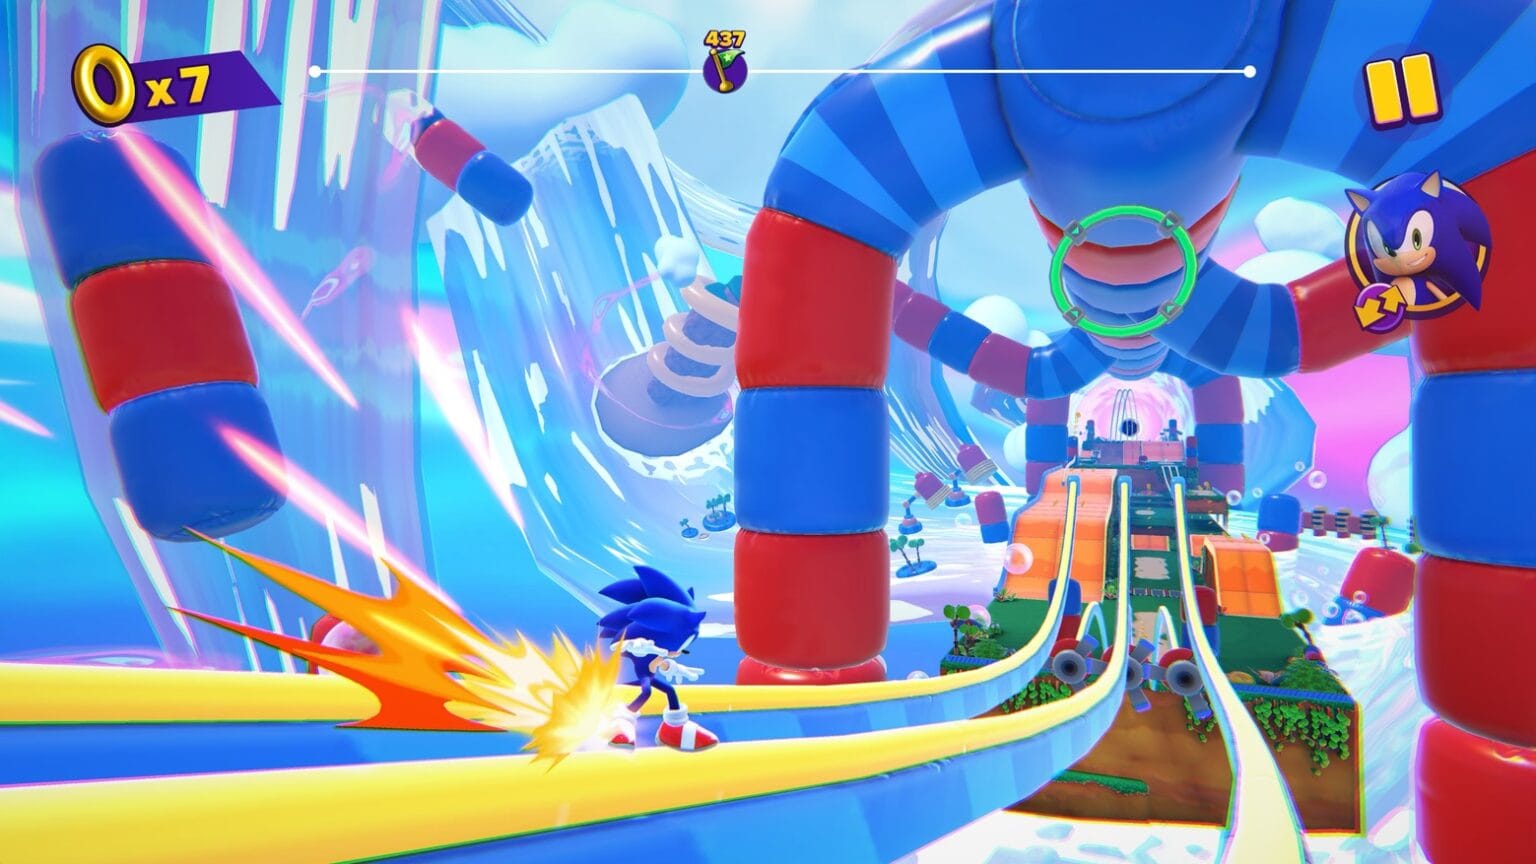 'Sonic Dream Team' is one of four games just added to Apple Arcade.